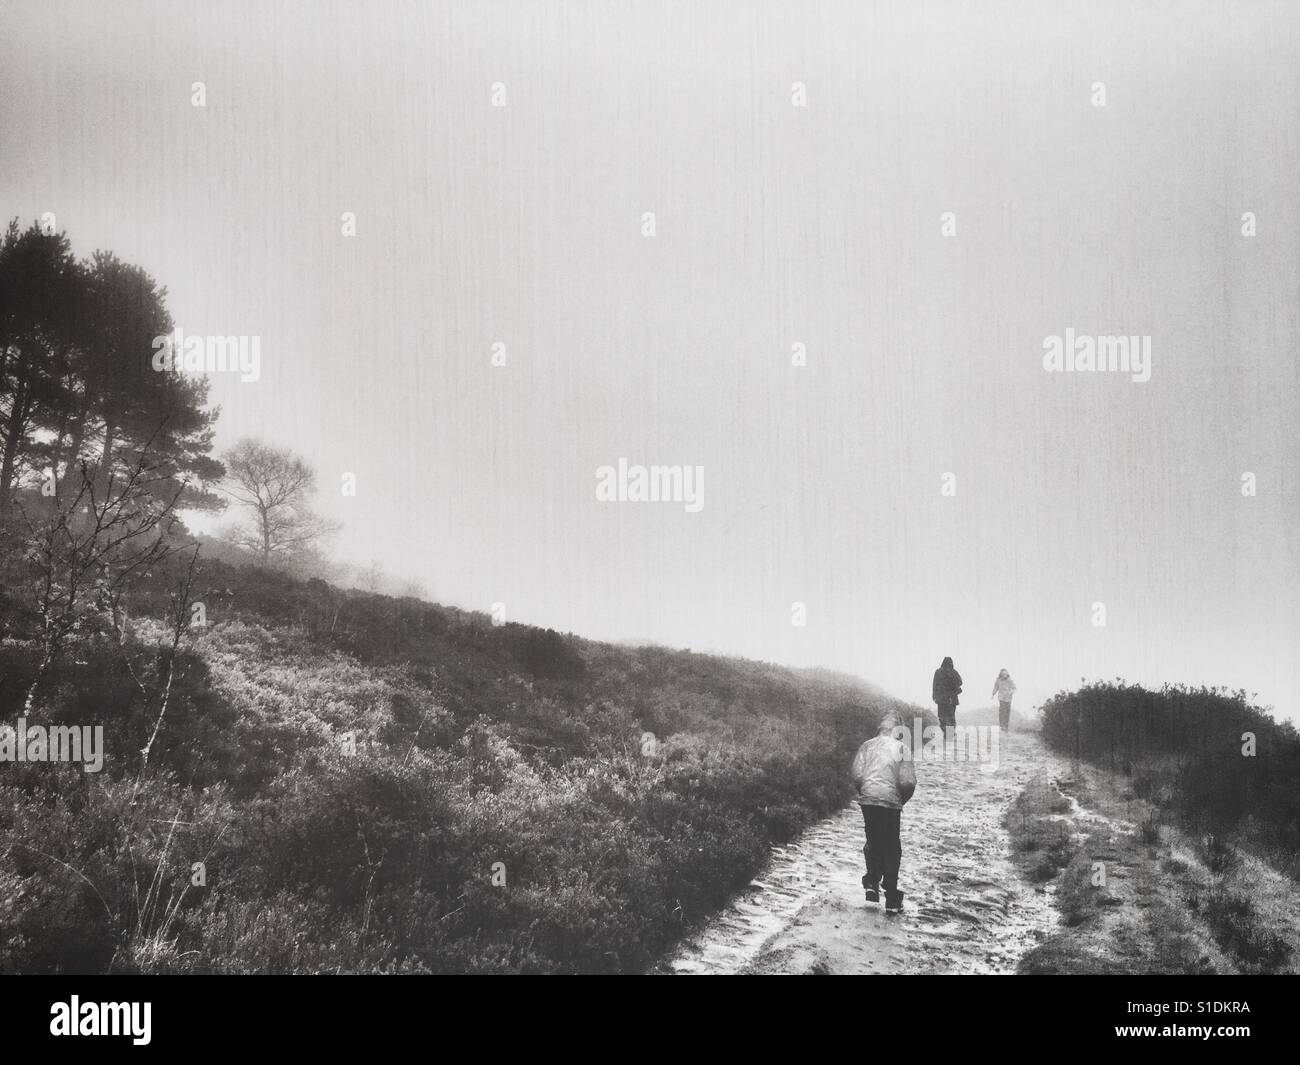 Family walking on the moors in the mist and rain Stock Photo